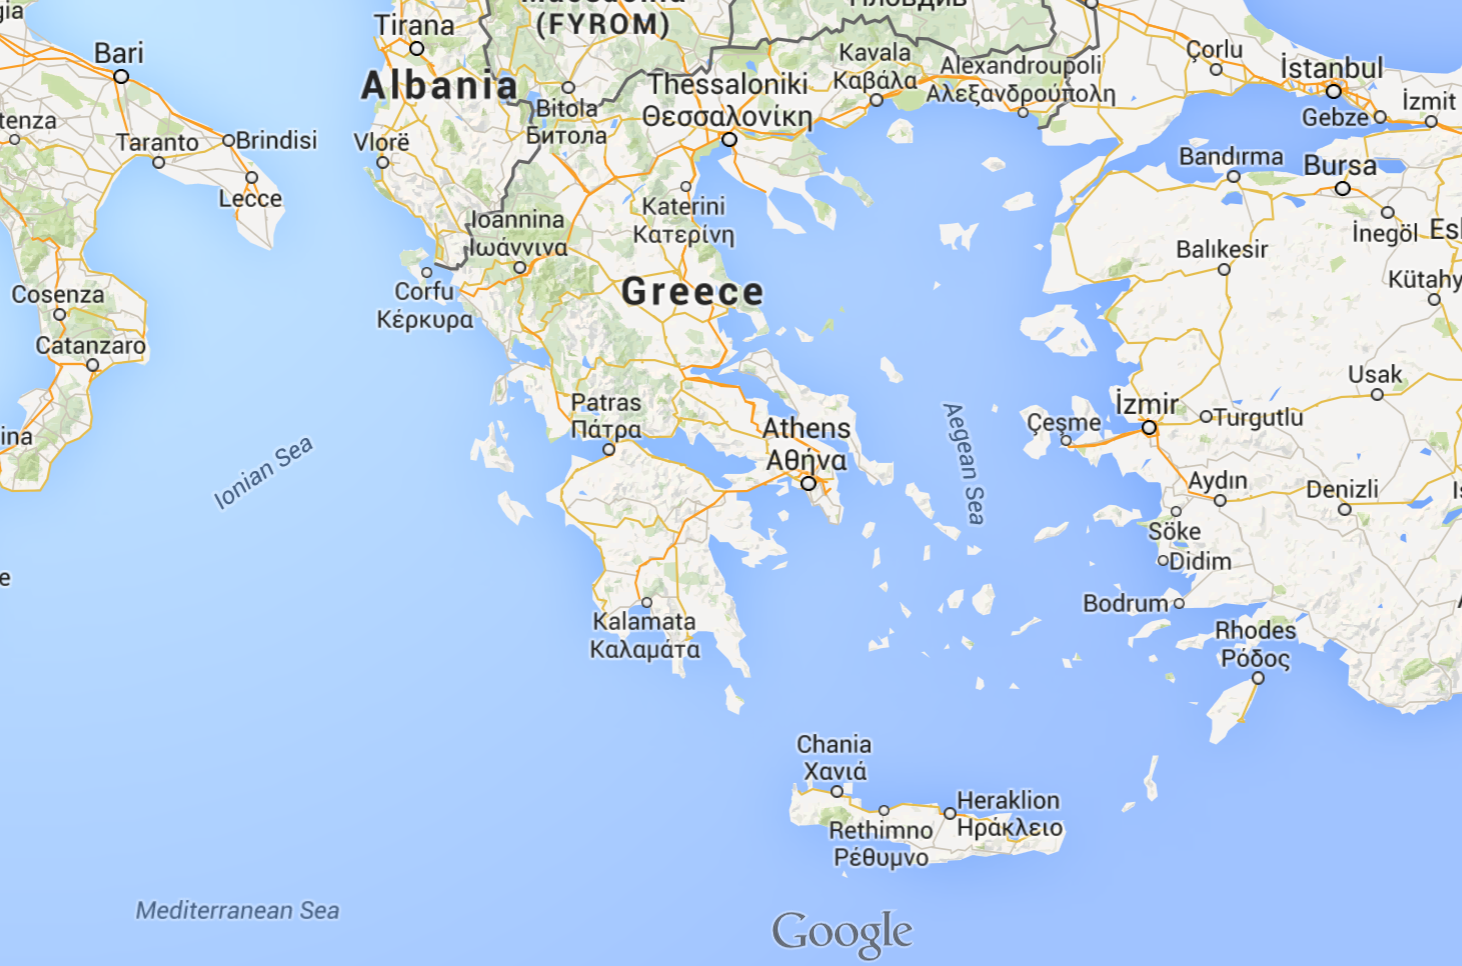 Screen shot of Greece from Google Maps.